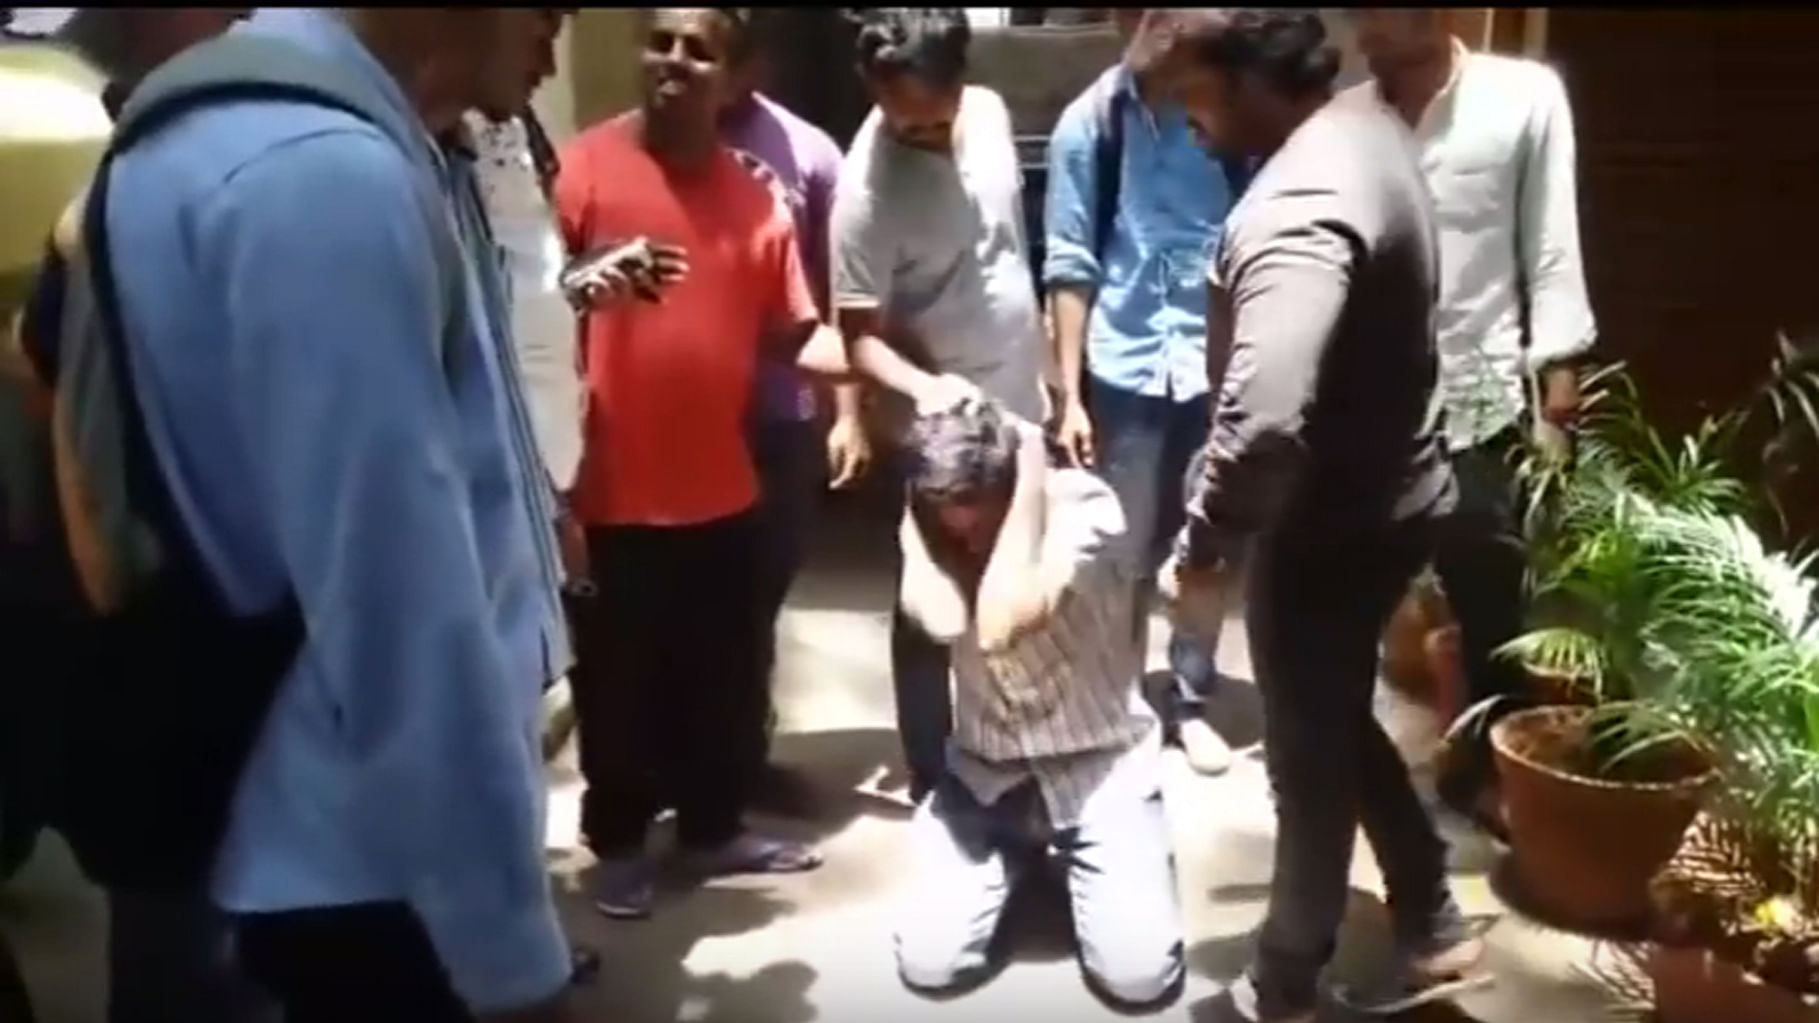 22-year-old student filmed being thrashed by a group of locals in Bengaluru over Cauvery dispute comments. (Photo Courtesy: Screengrab of <a href="https://www.youtube.com/watch?v=Tuj2rVwfmI4">Youtube video</a>)